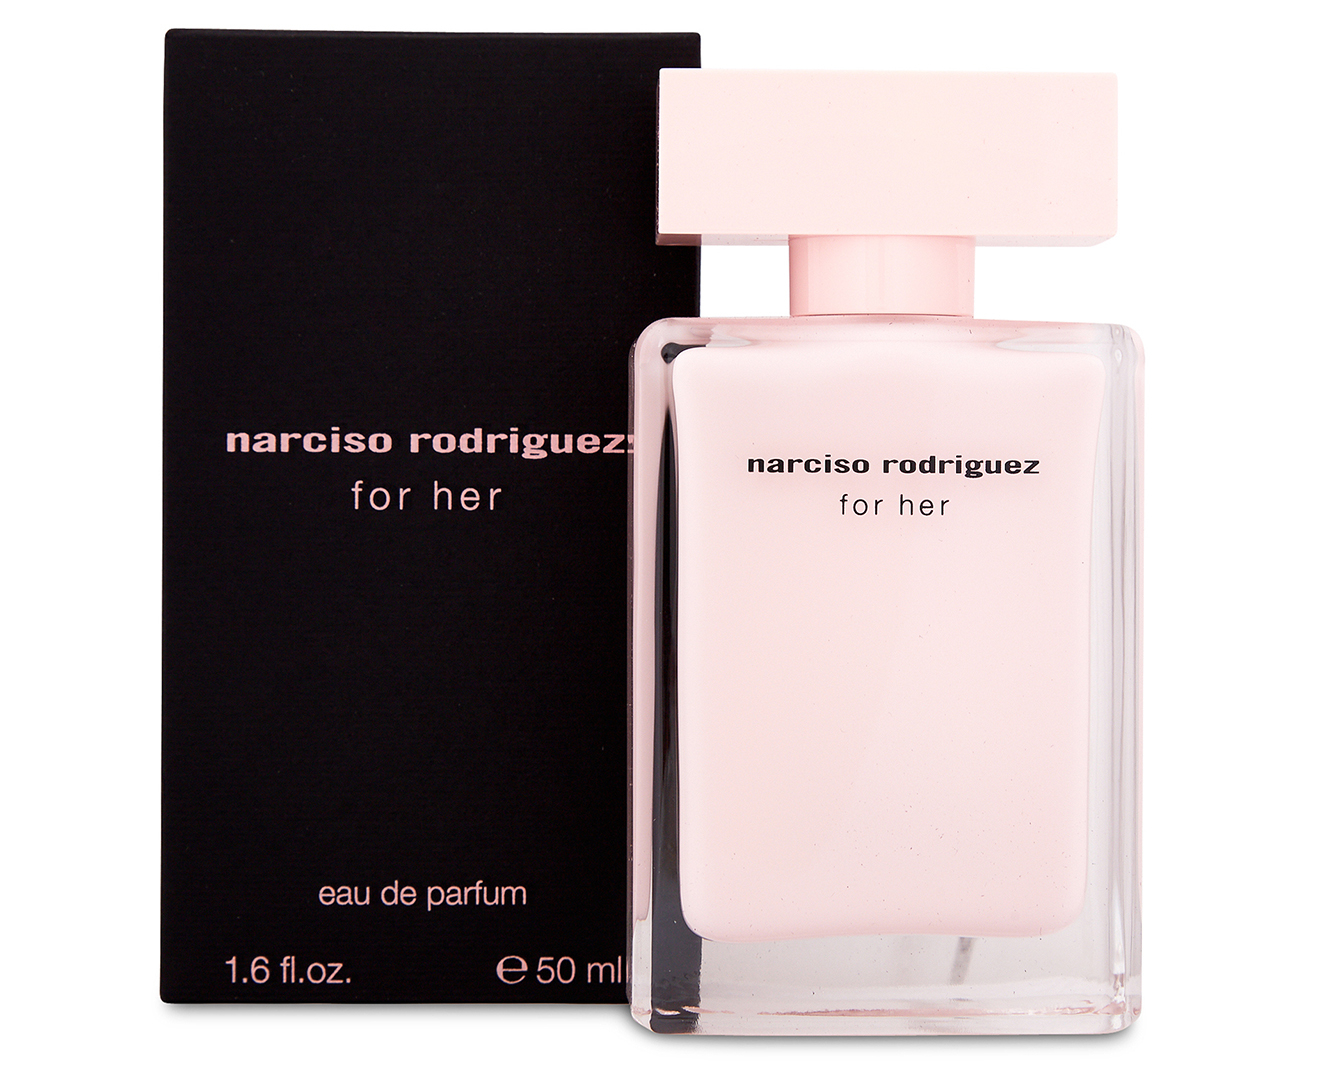 Narciso Rodriguez For Her EDP Perfume 50mL | Catch.com.au